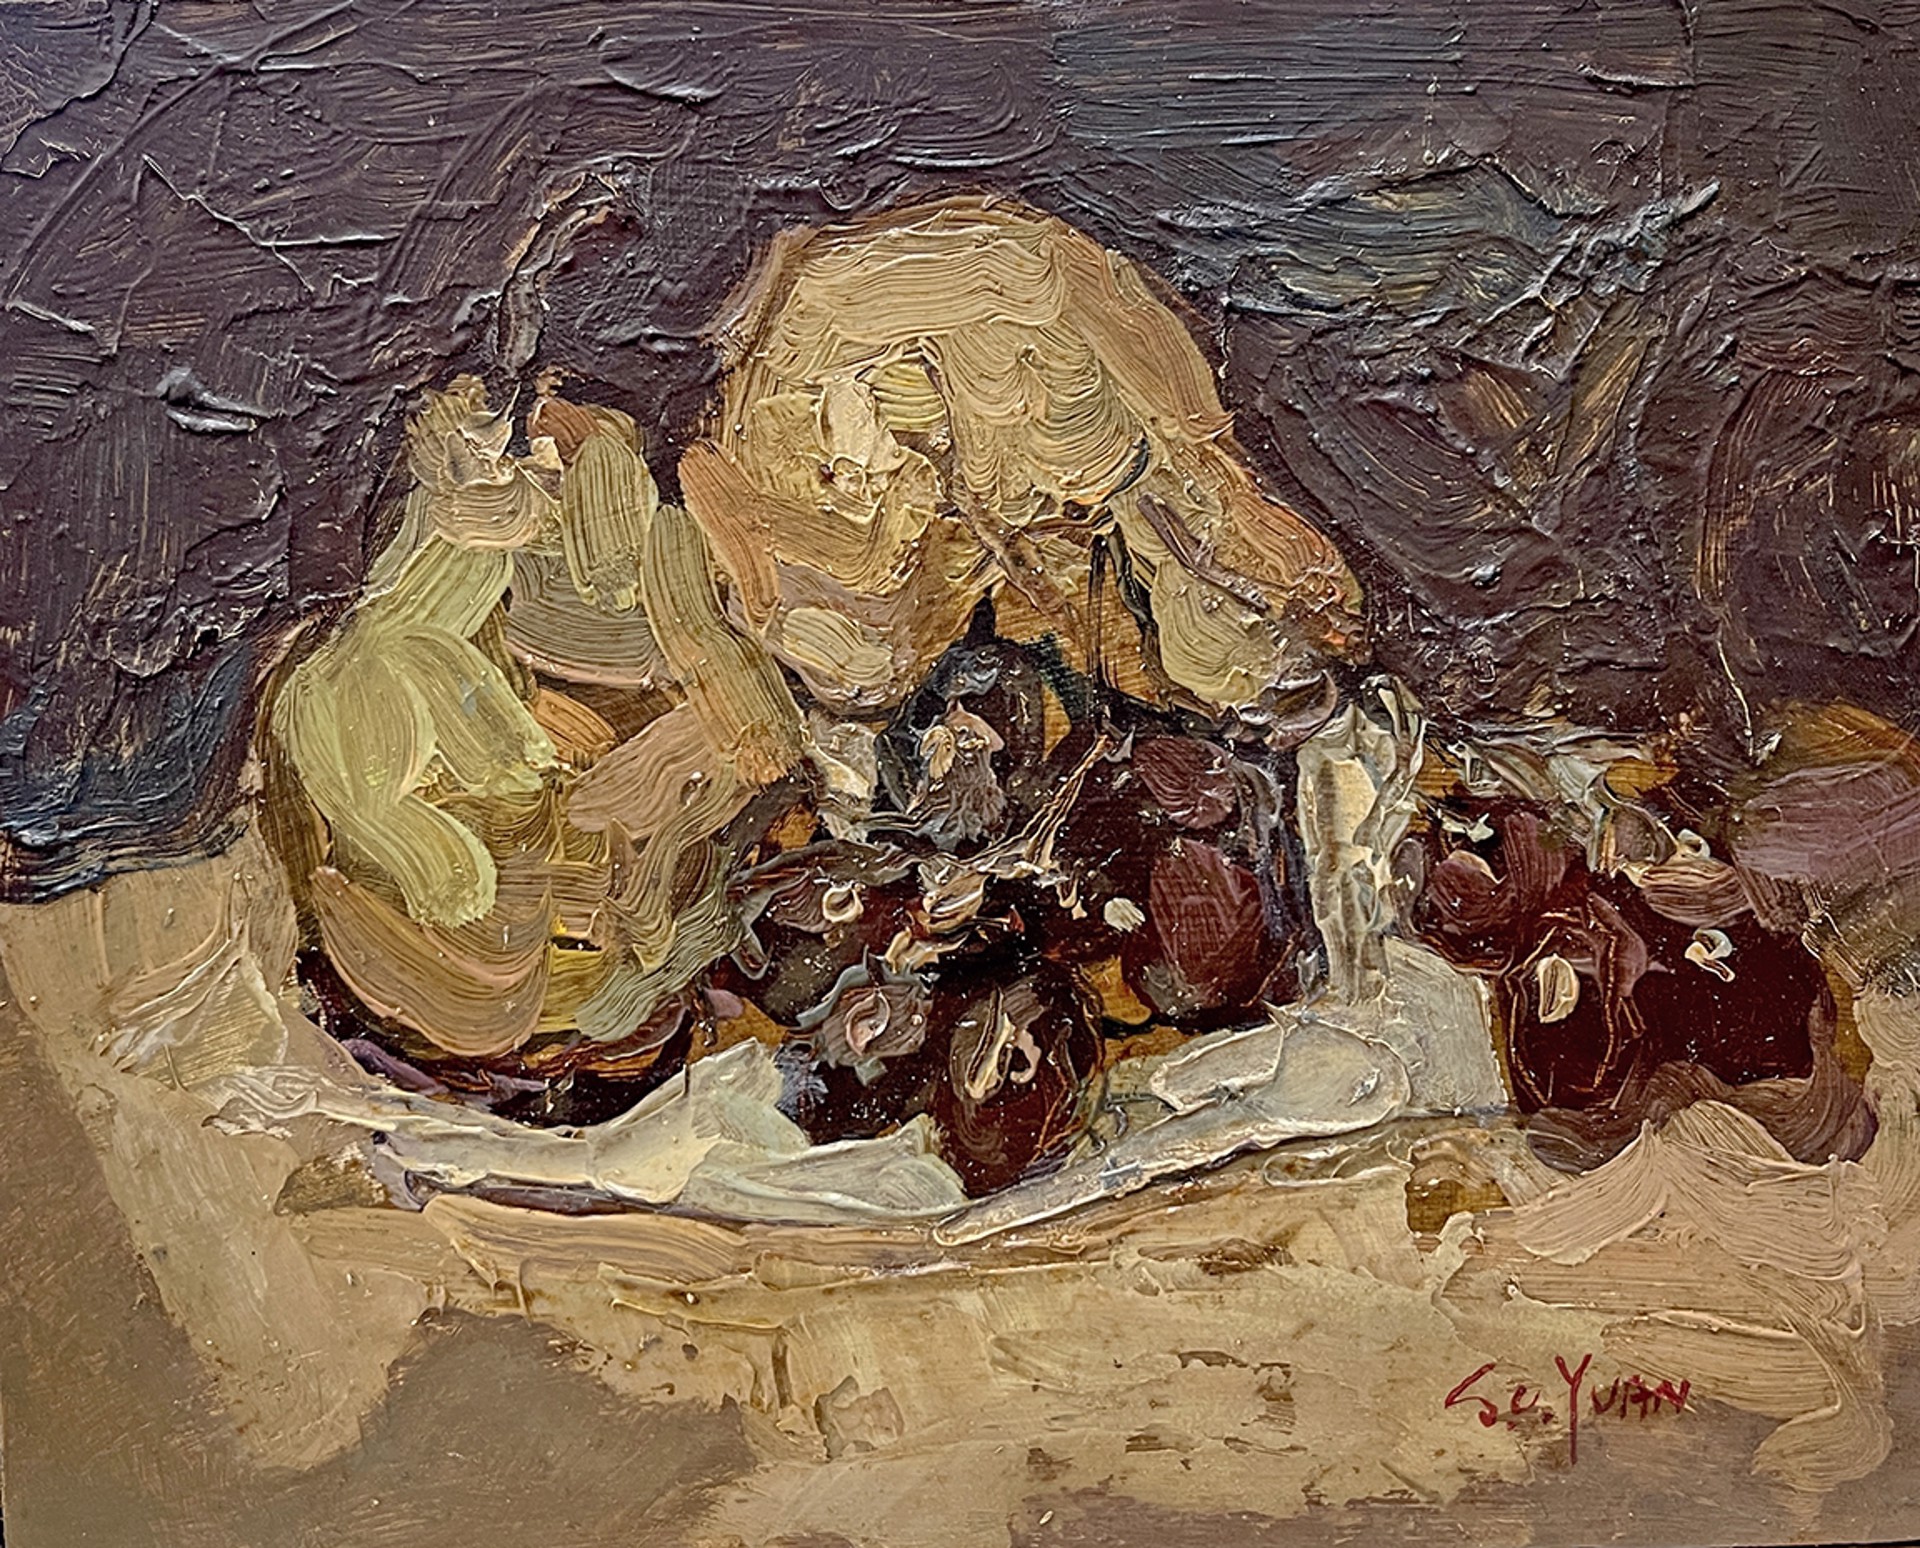 Untitled (still life with fruit) by S.C. Yuan